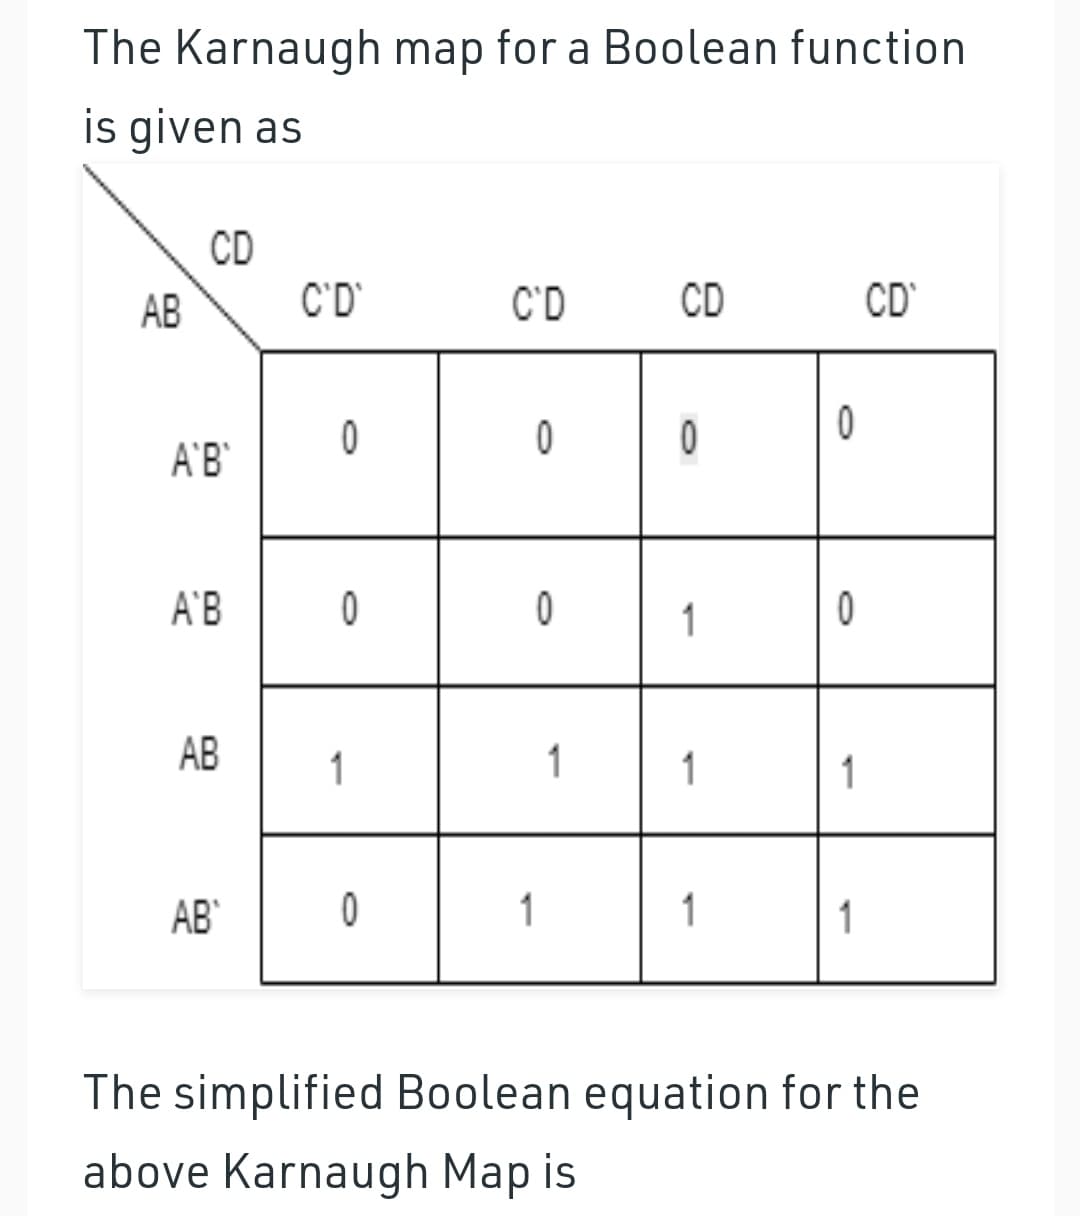 The Karnaugh map for a Boolean function
is given as
CD
C'D'
АВ
C'D
CD
CD
A'B'
A'B
1
АВ
1
1
1
1
AB
1
1
1
The simplified Boolean equation for the
above Karnaugh Map is
